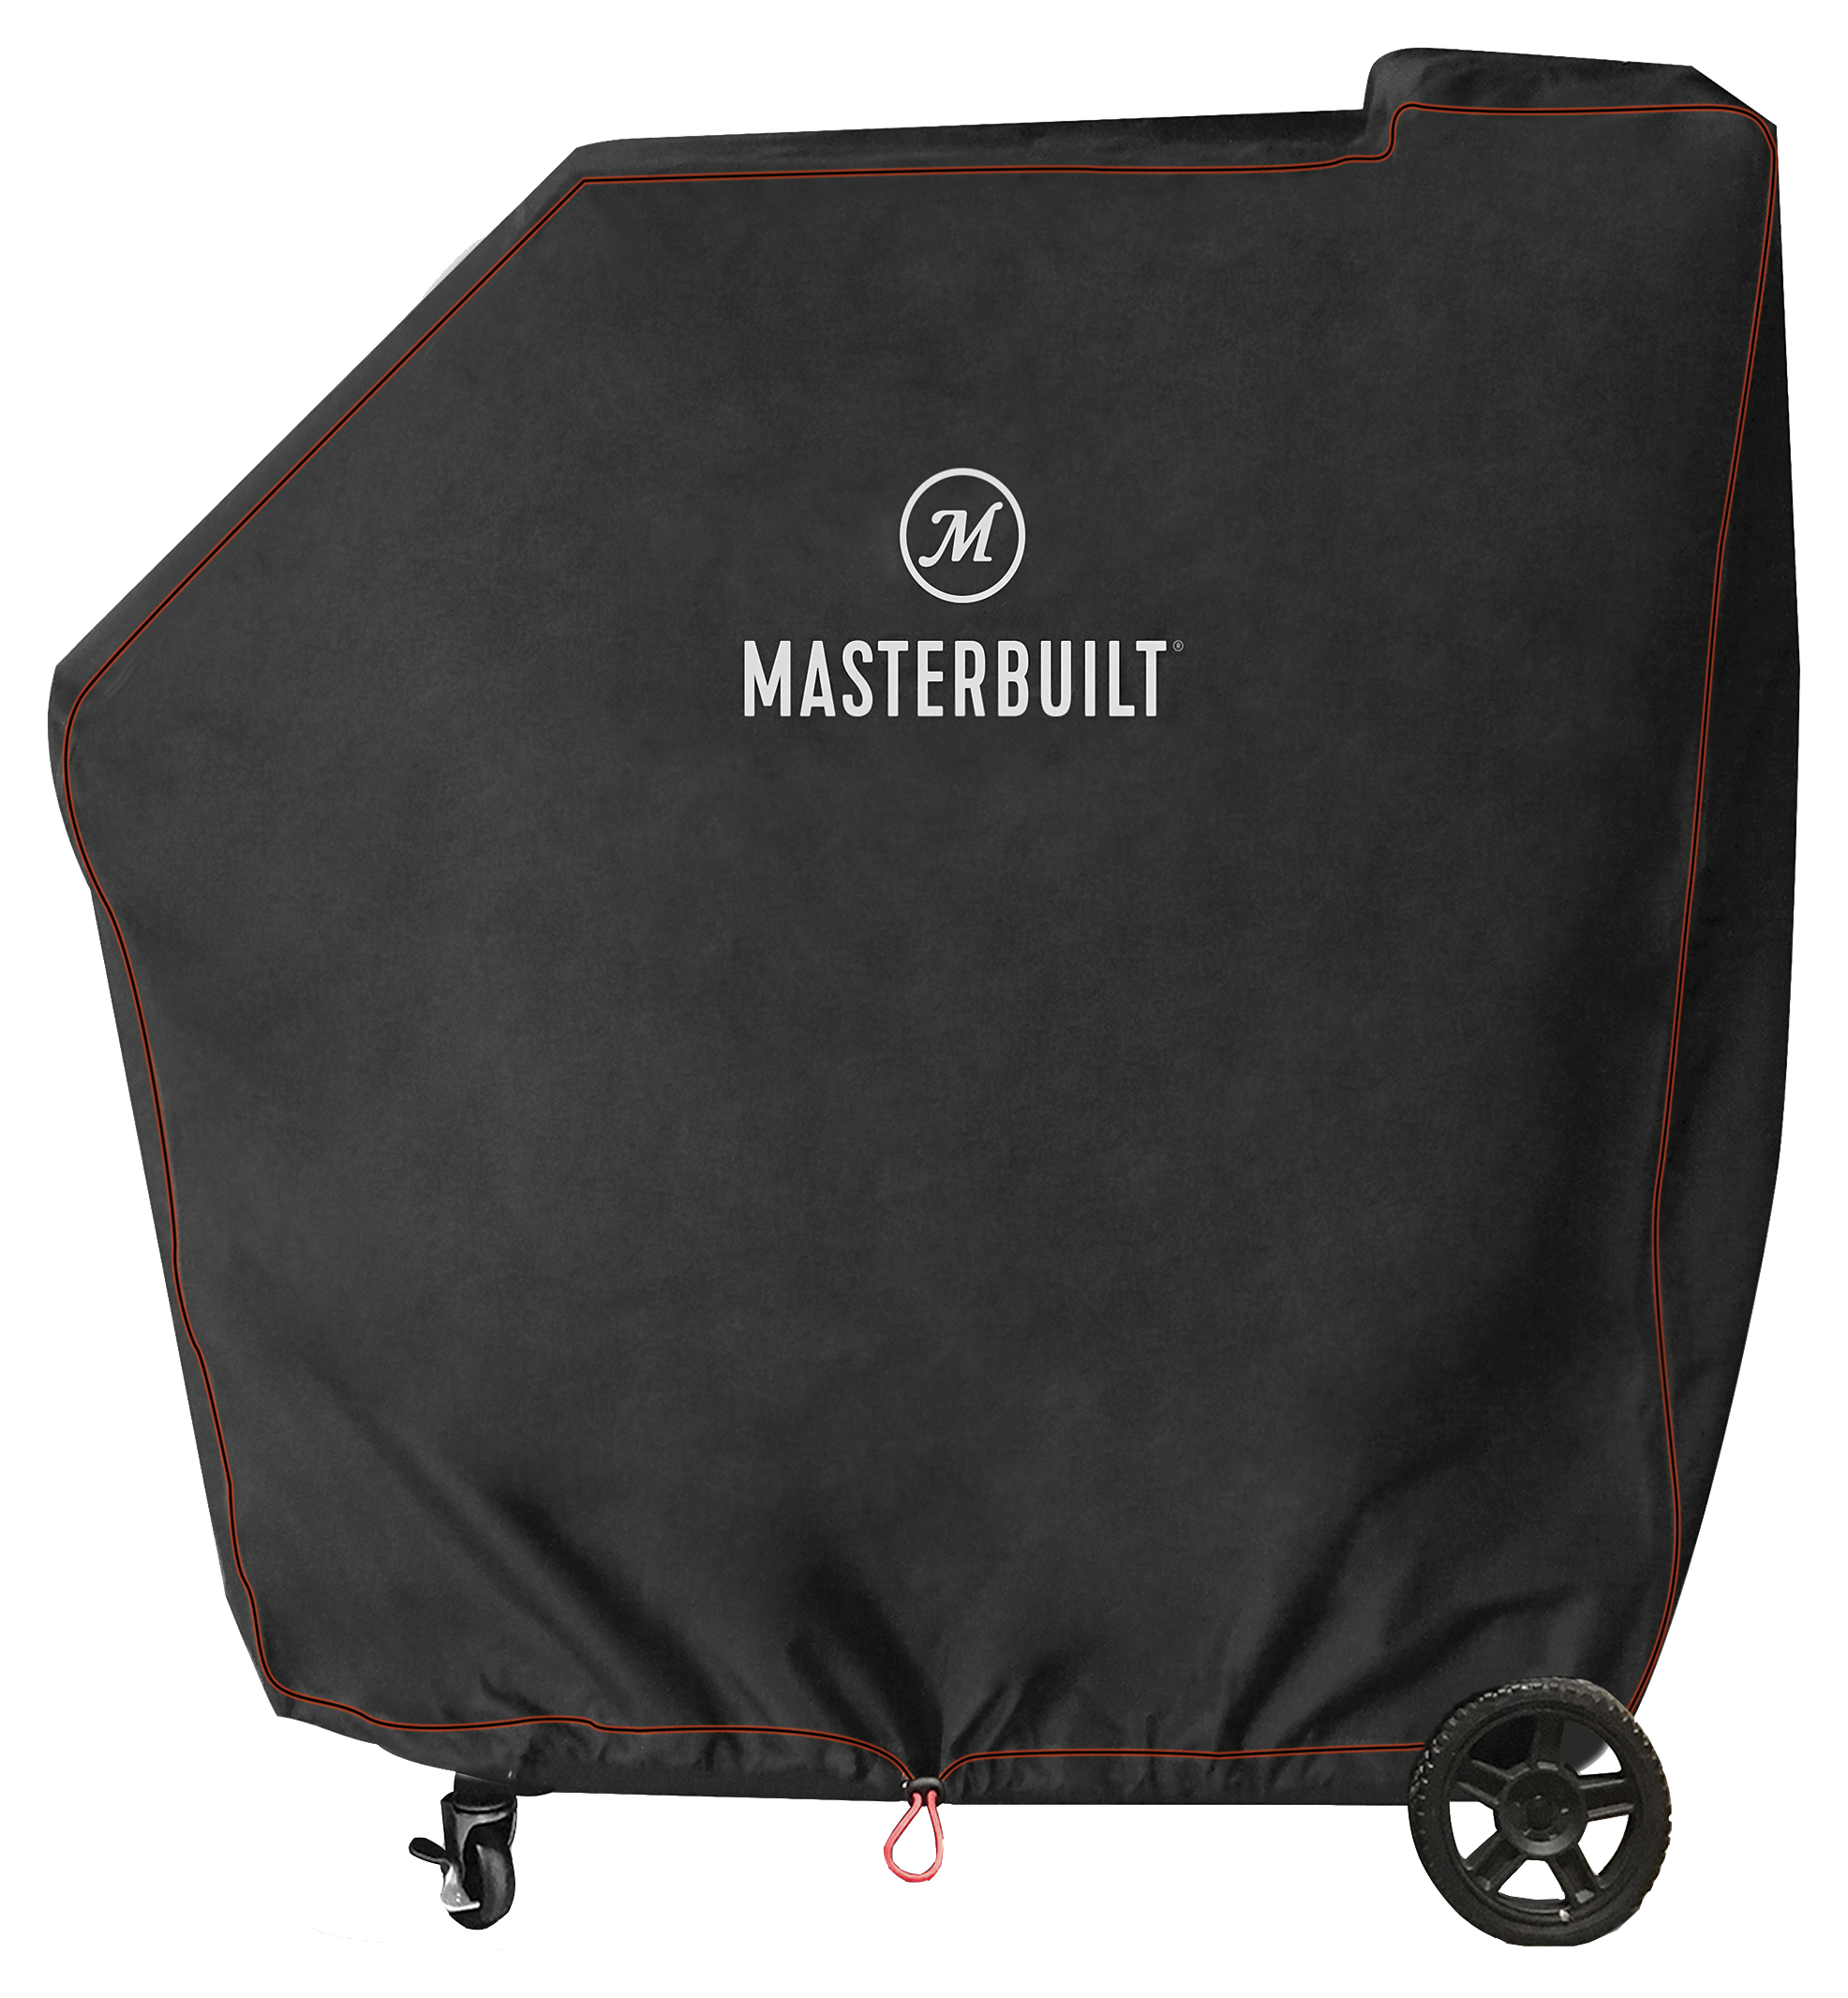 Masterbuilt Gravity Series 560 Digital Charcoal Grill and Smoker Cover